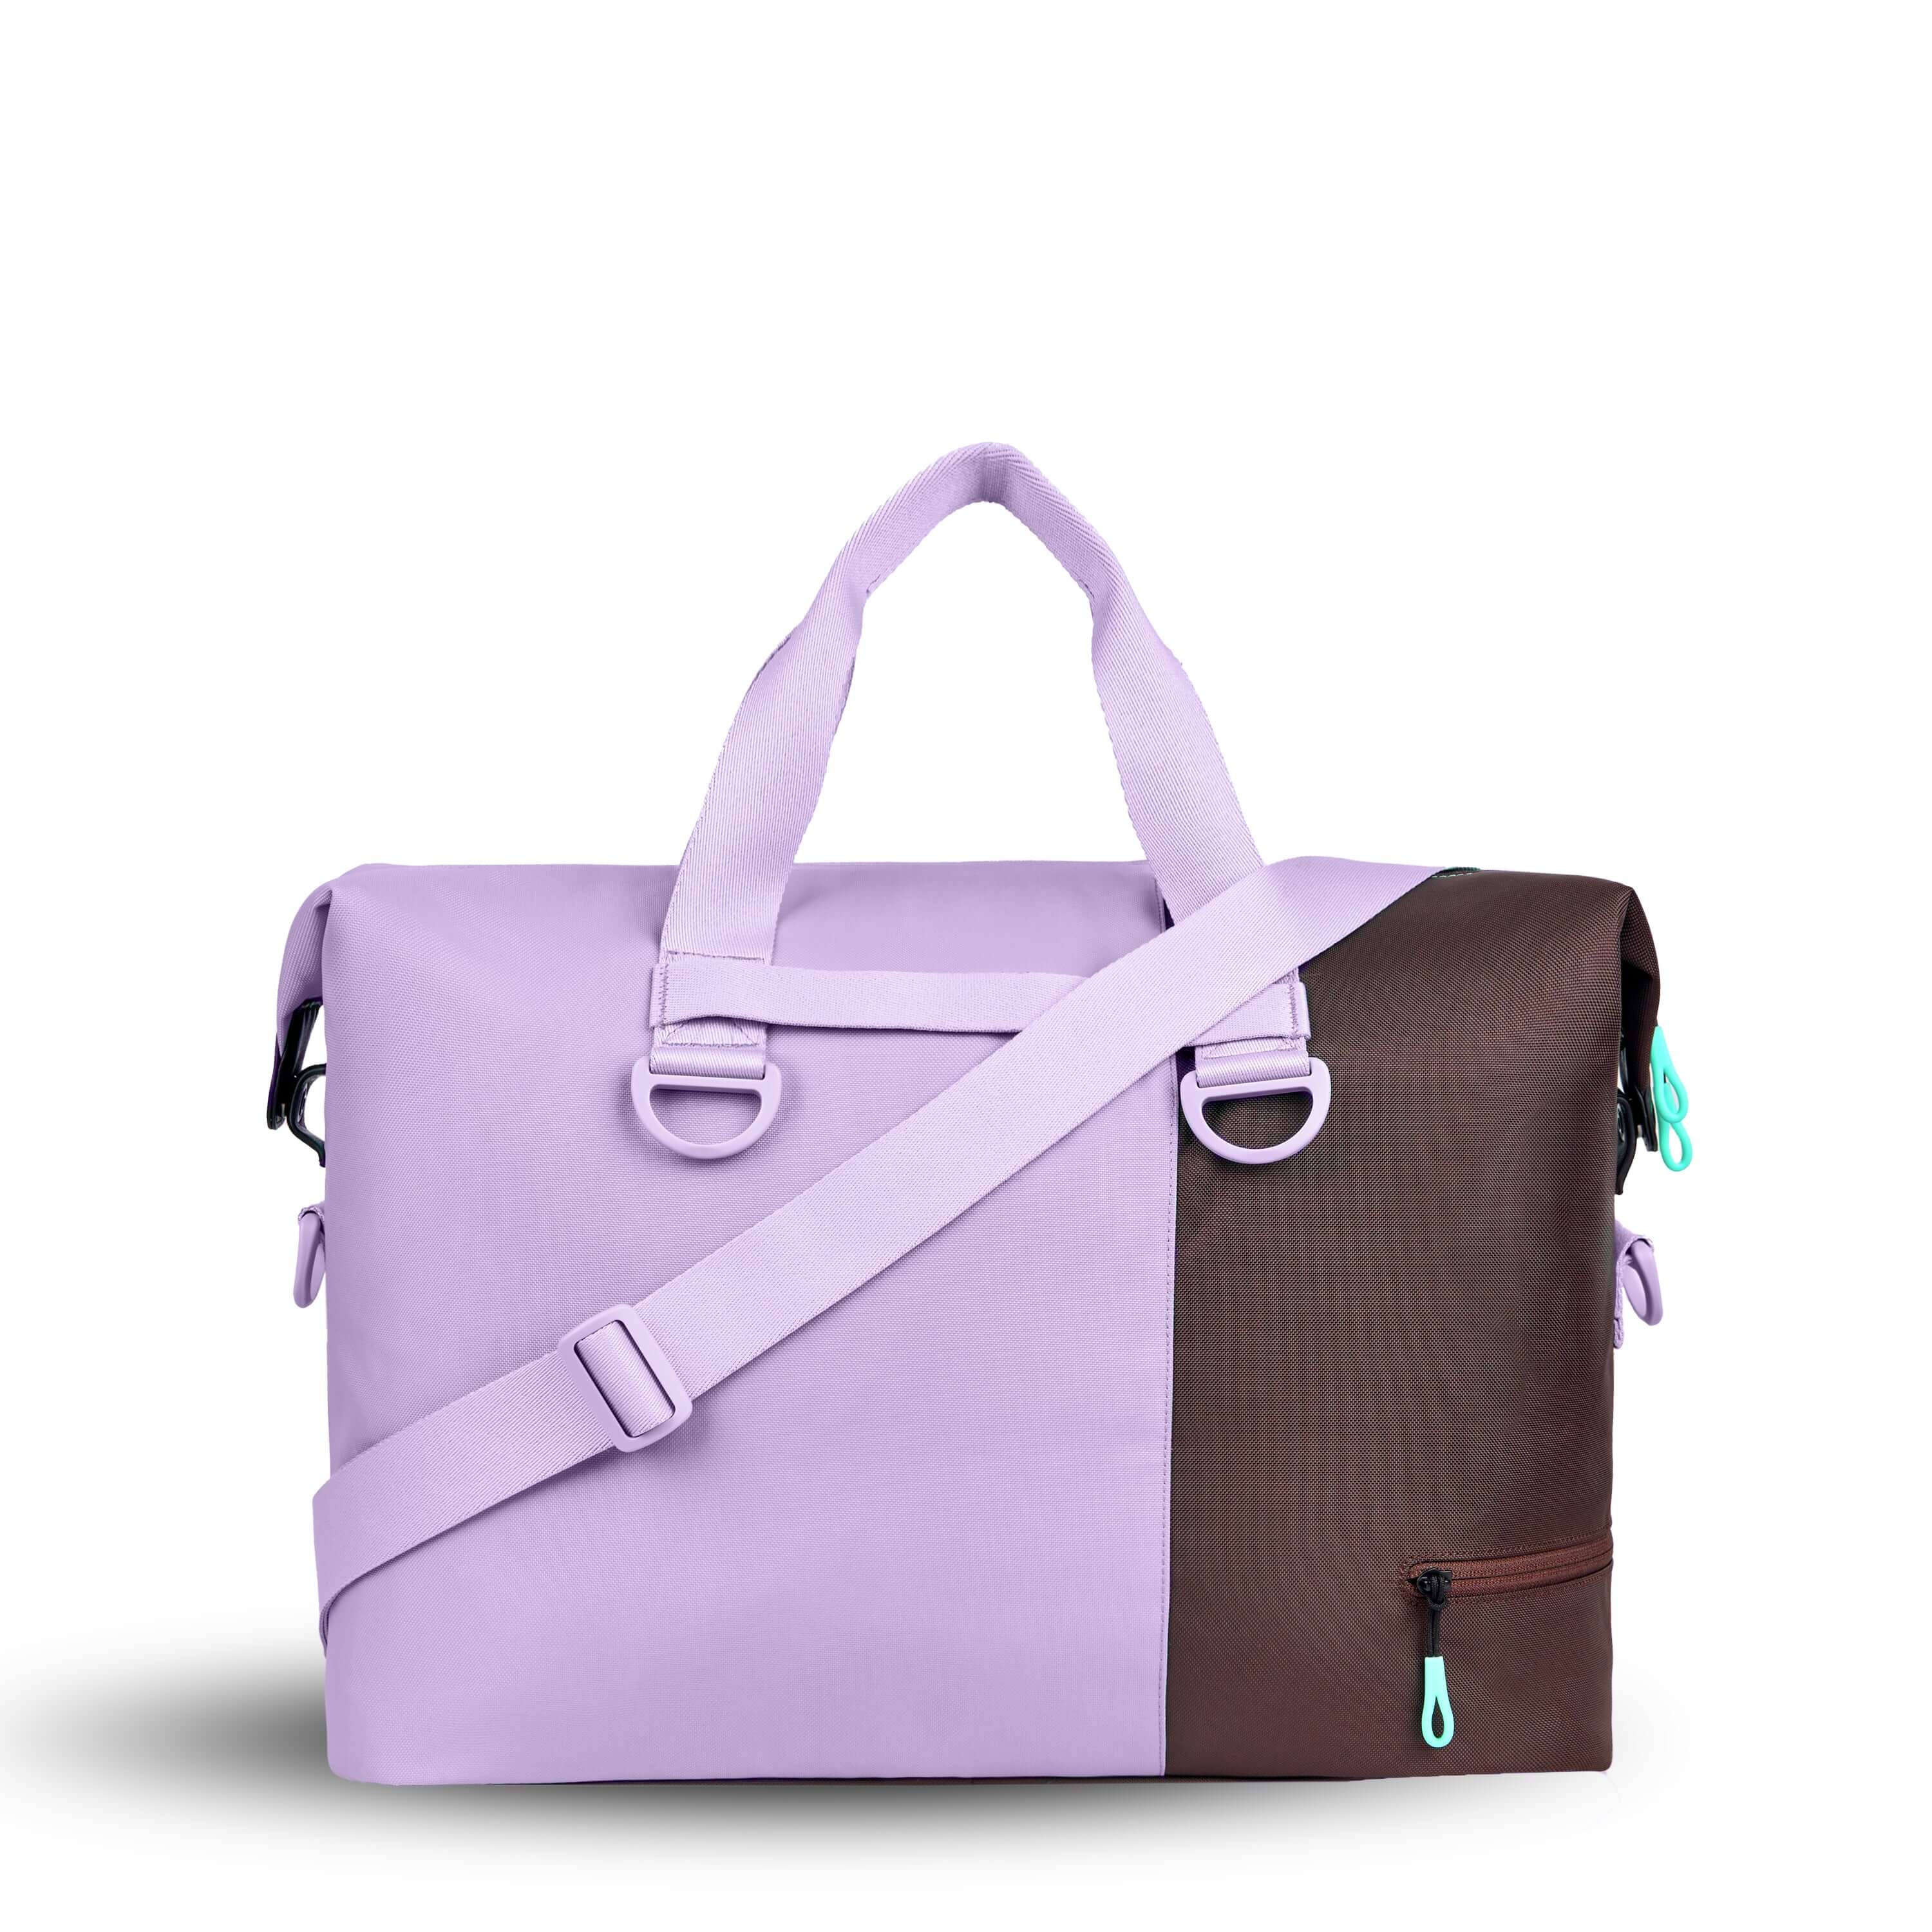 Back view of Sherpani bag, the Sola in Lavender. The bag is two-toned in lavender and brown. Easy-pull zippers are accented in aqua. The bag has tote handles and an adjustable/detachable crossbody strap. 